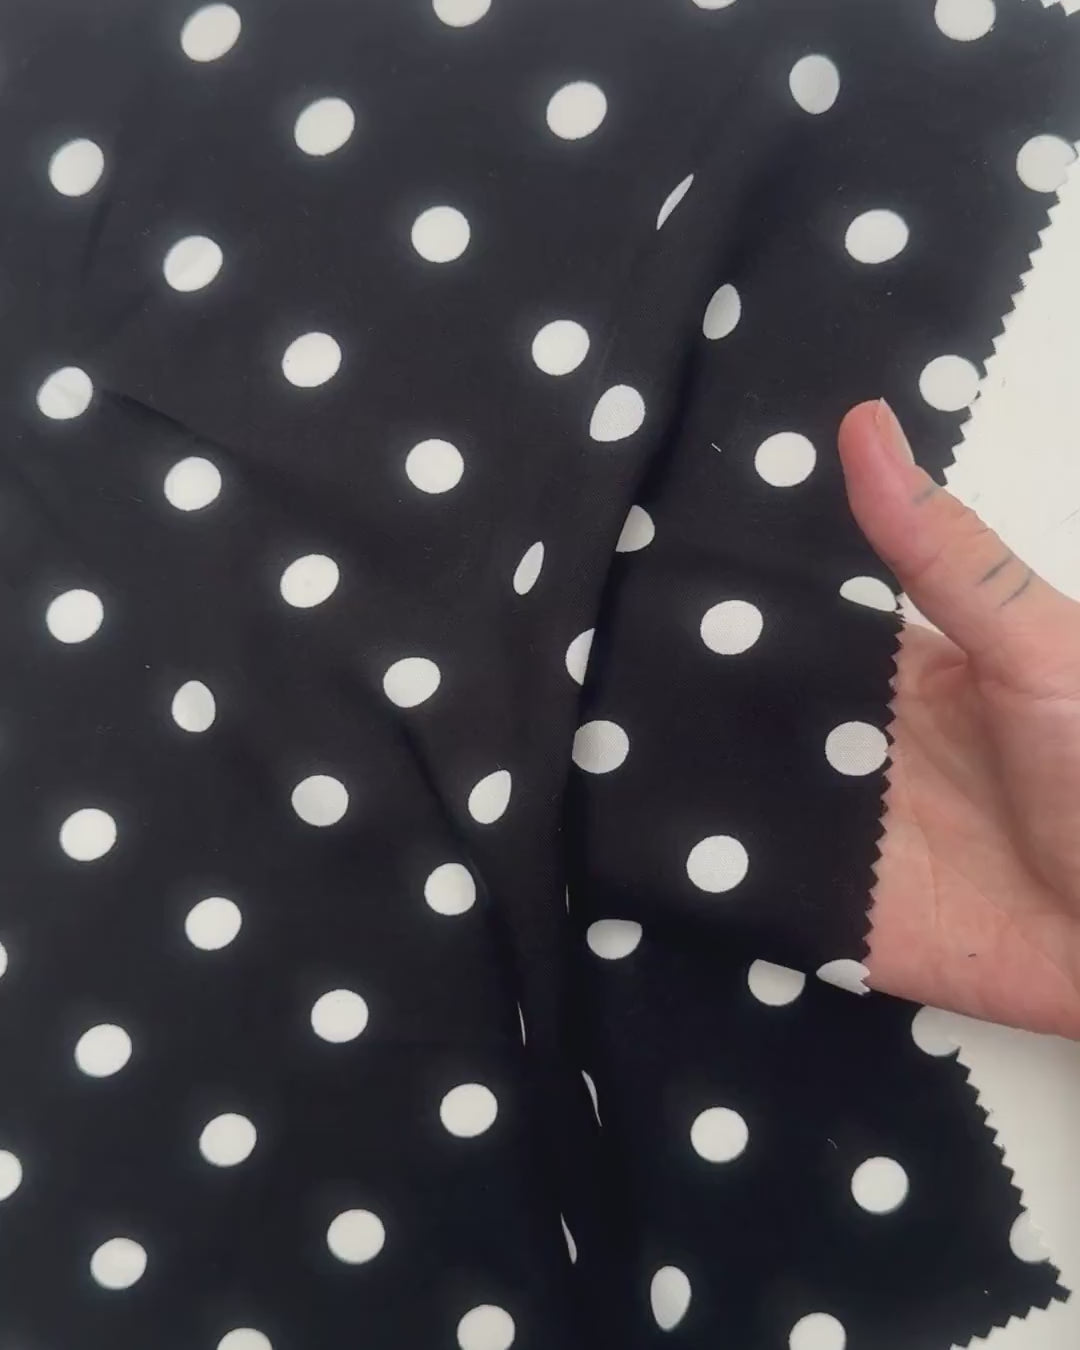 Black Polka dots on White Rayon Challis, online textile store, sewing, fabric store, sewing store, cheap fabric store, kiki textiles